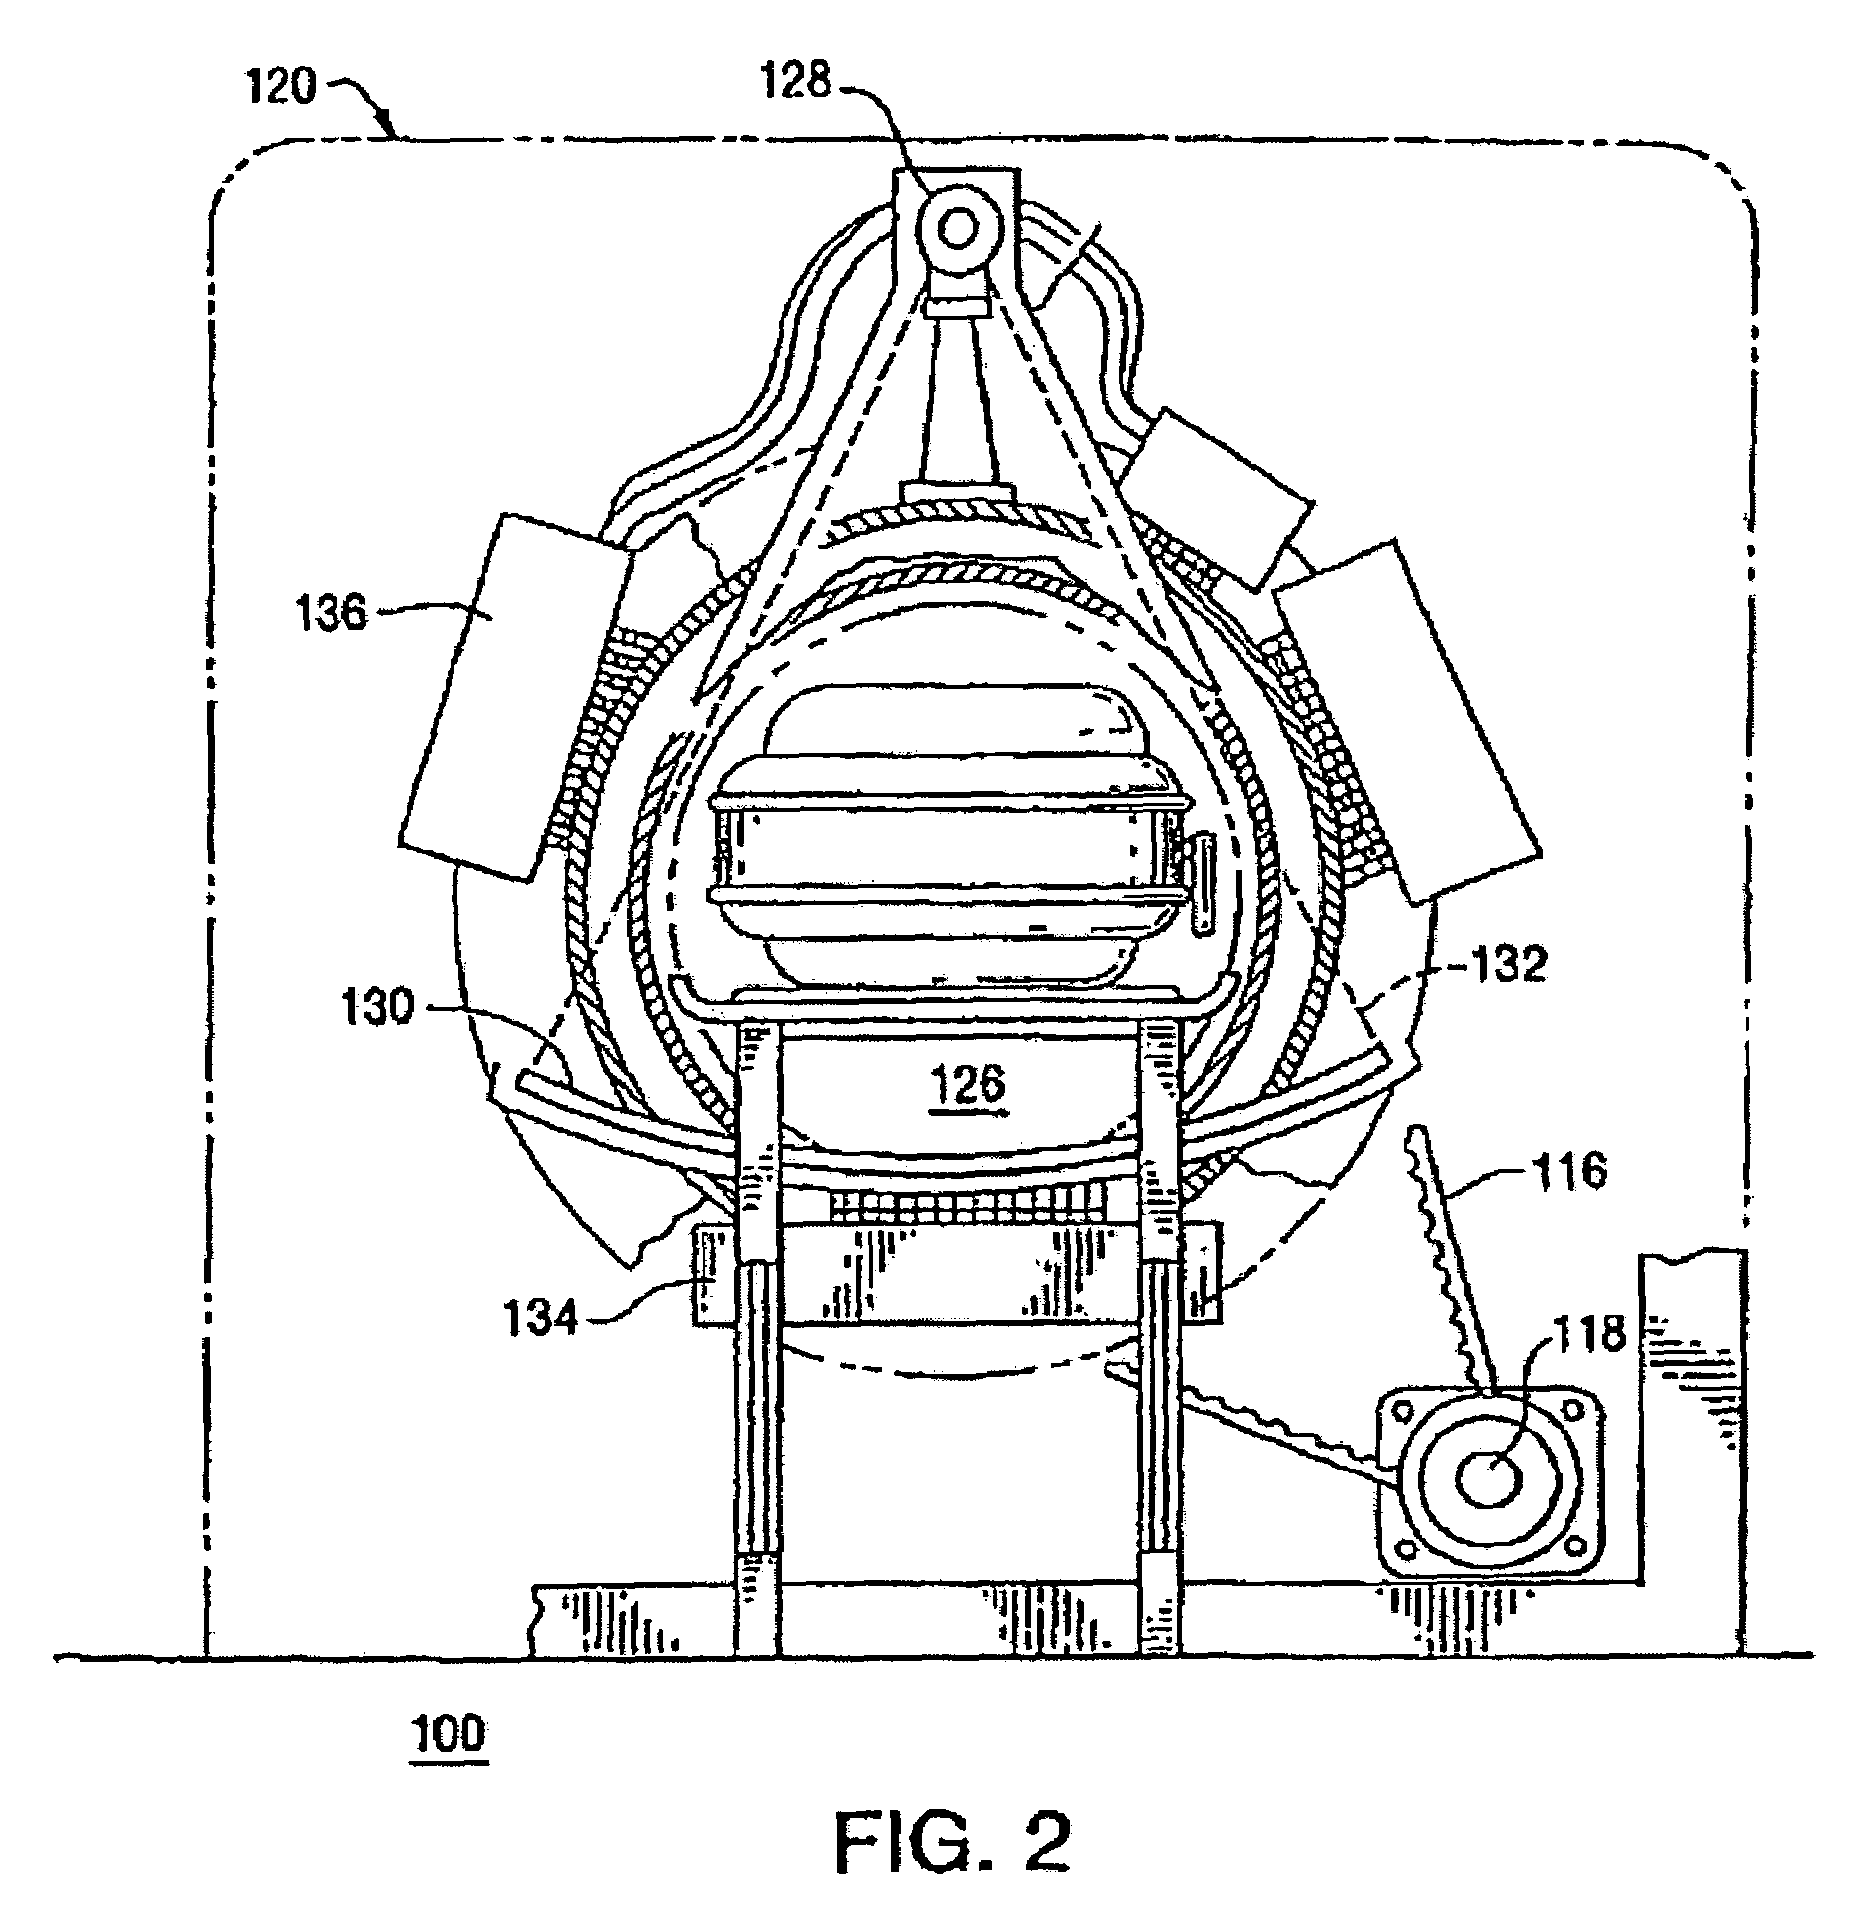 Method of and system for detecting anomalies in projection images generated by computed tomography scanners